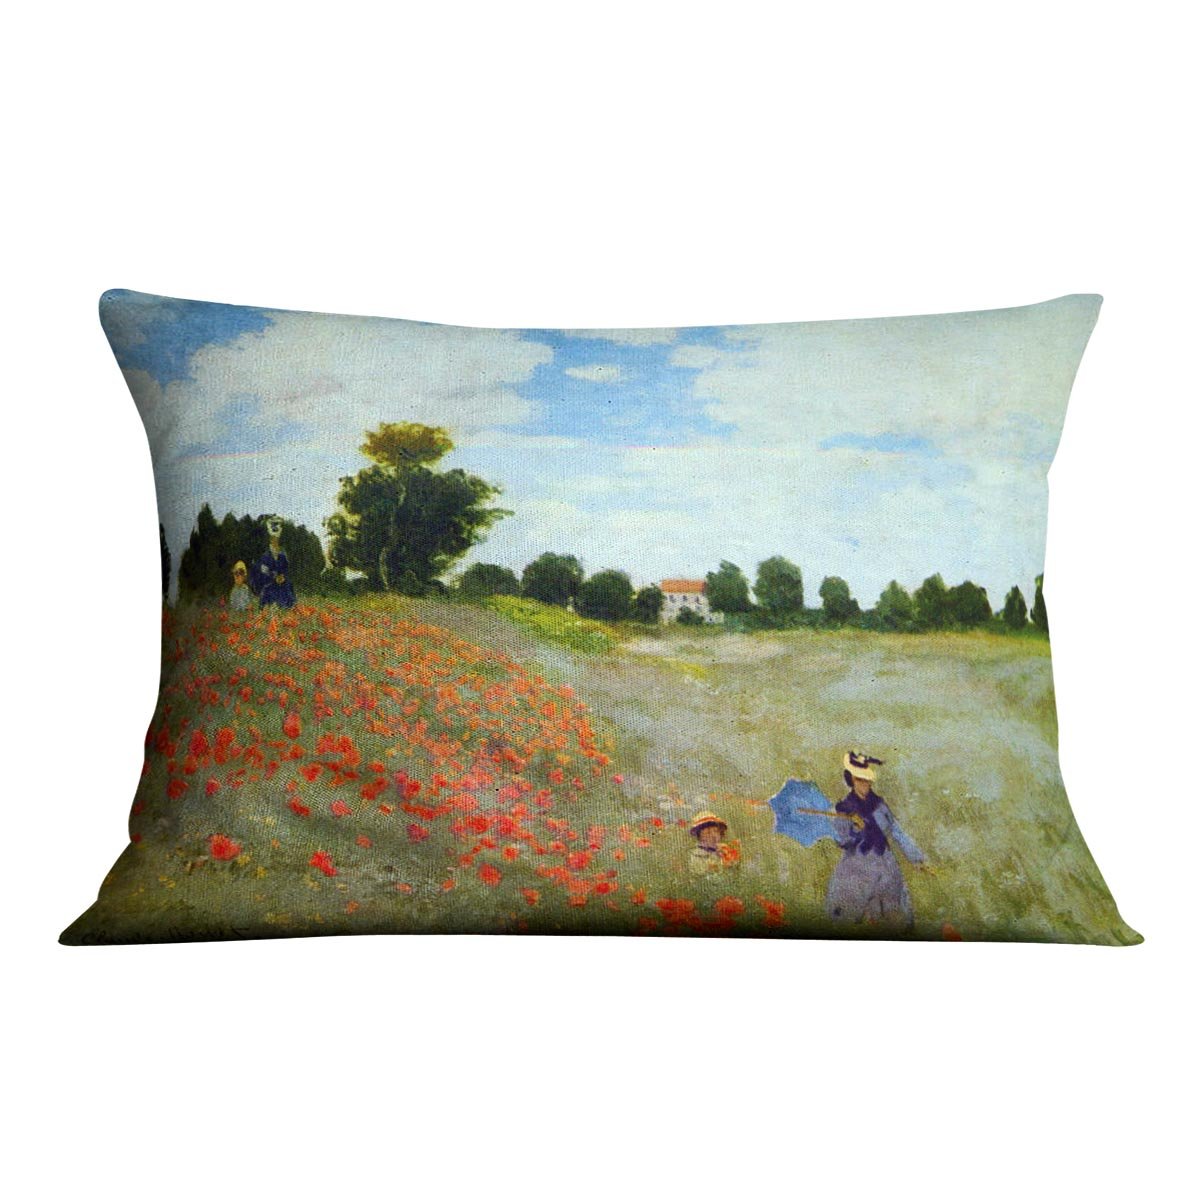 Poppies by Monet Throw Pillow